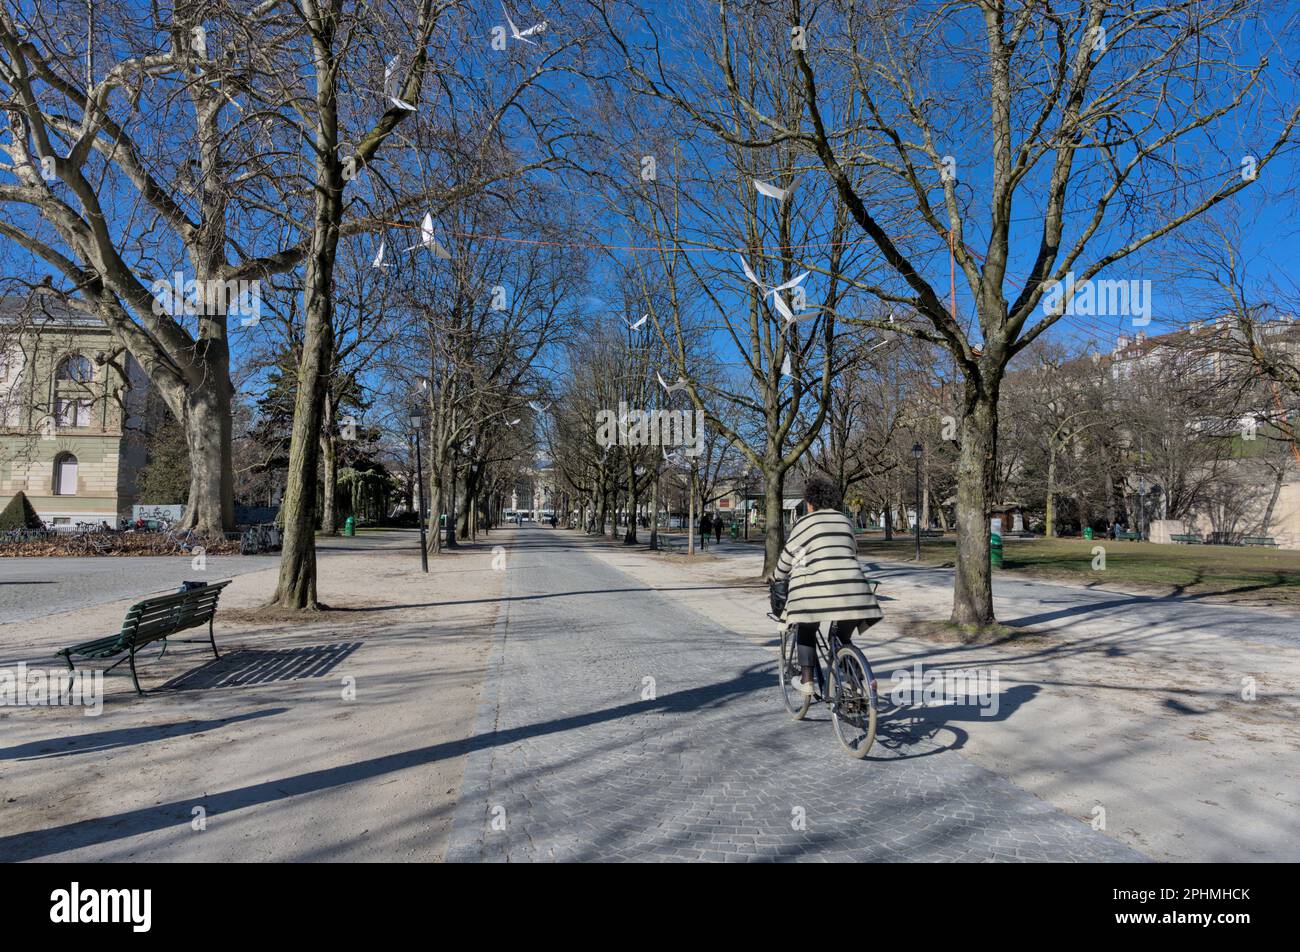 Middle aged woman riding her bike through the Bastions park in the daytime during the winter Stock Photo